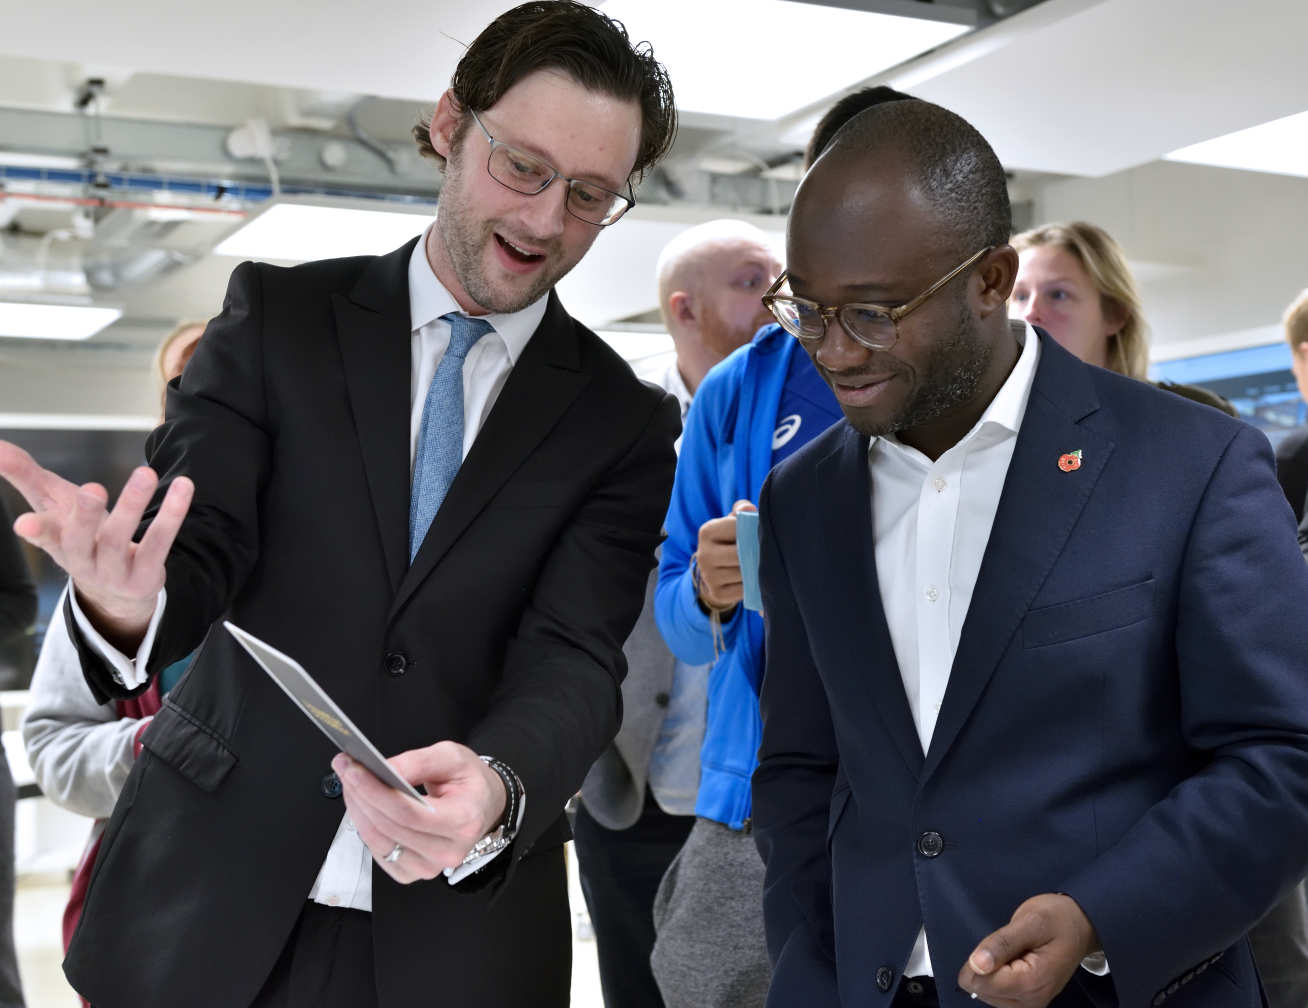 (Leo Evans and former Universities and Science Minister Sam Gyimah MP